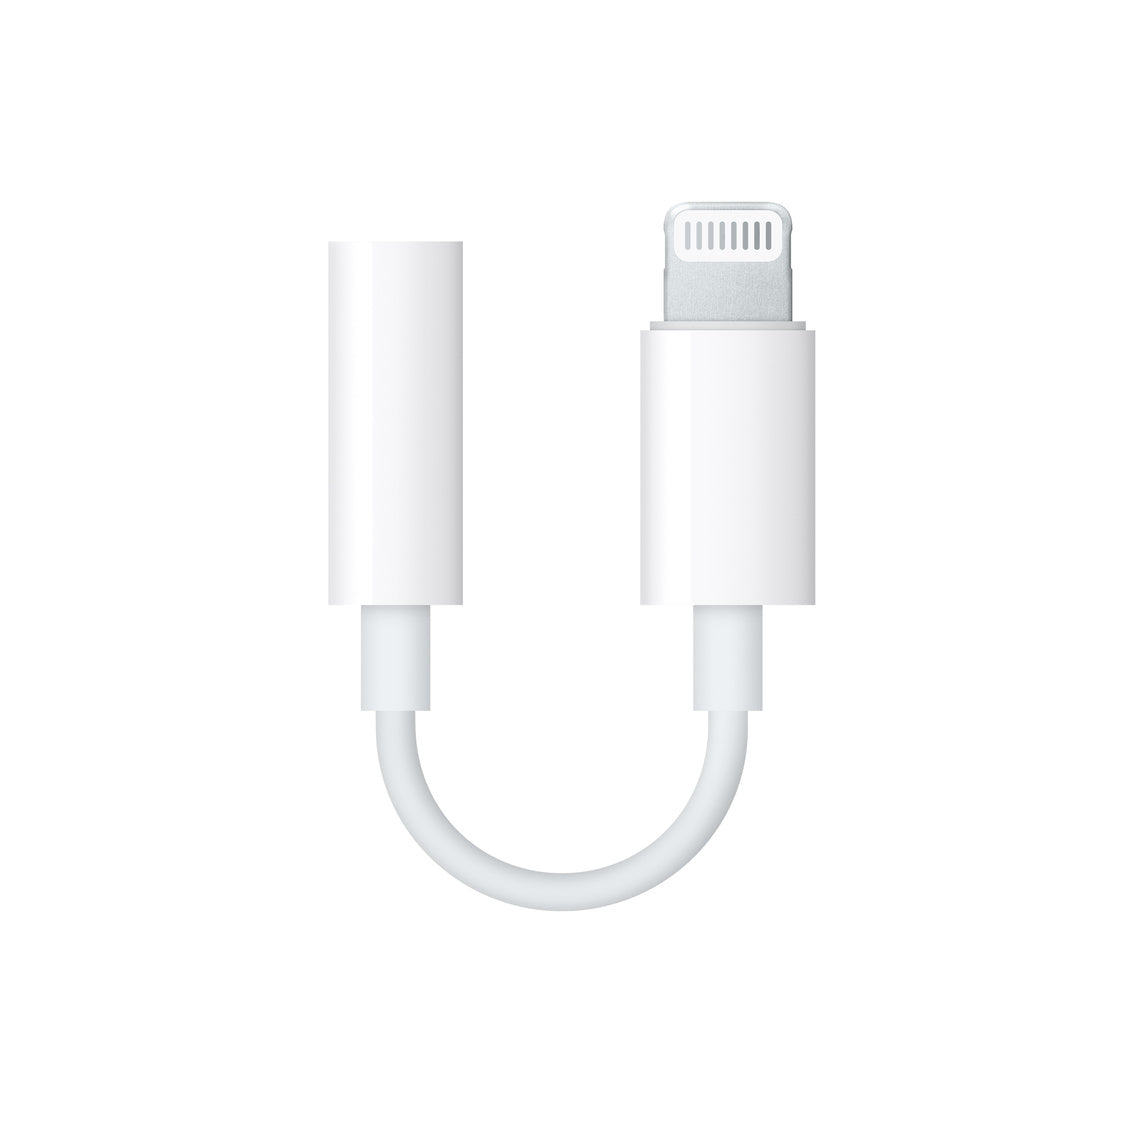 Apple iPhone 6 Plus Heaphone Jack Connector (Lightning to 3.5mm)